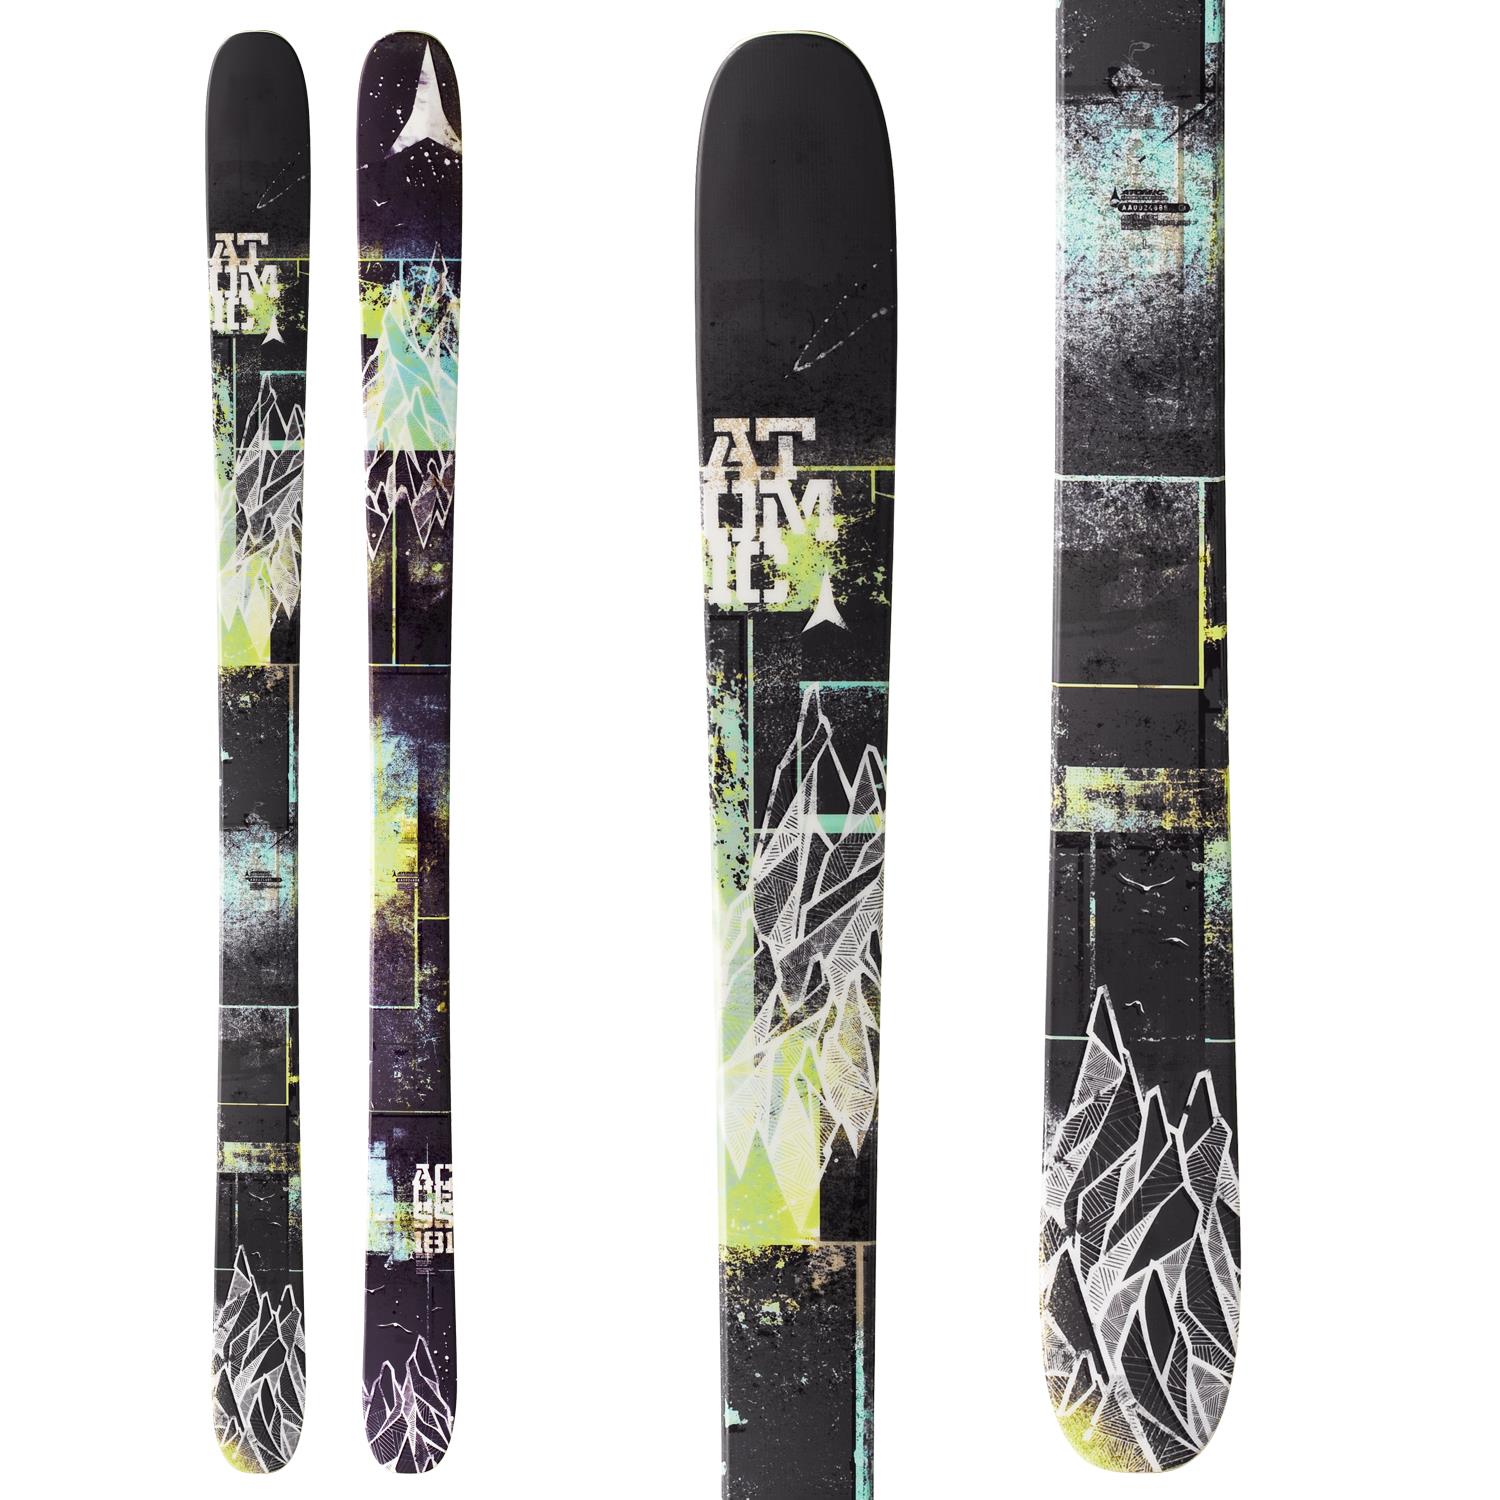 Atomic Access Skis 2014 | evo outlet